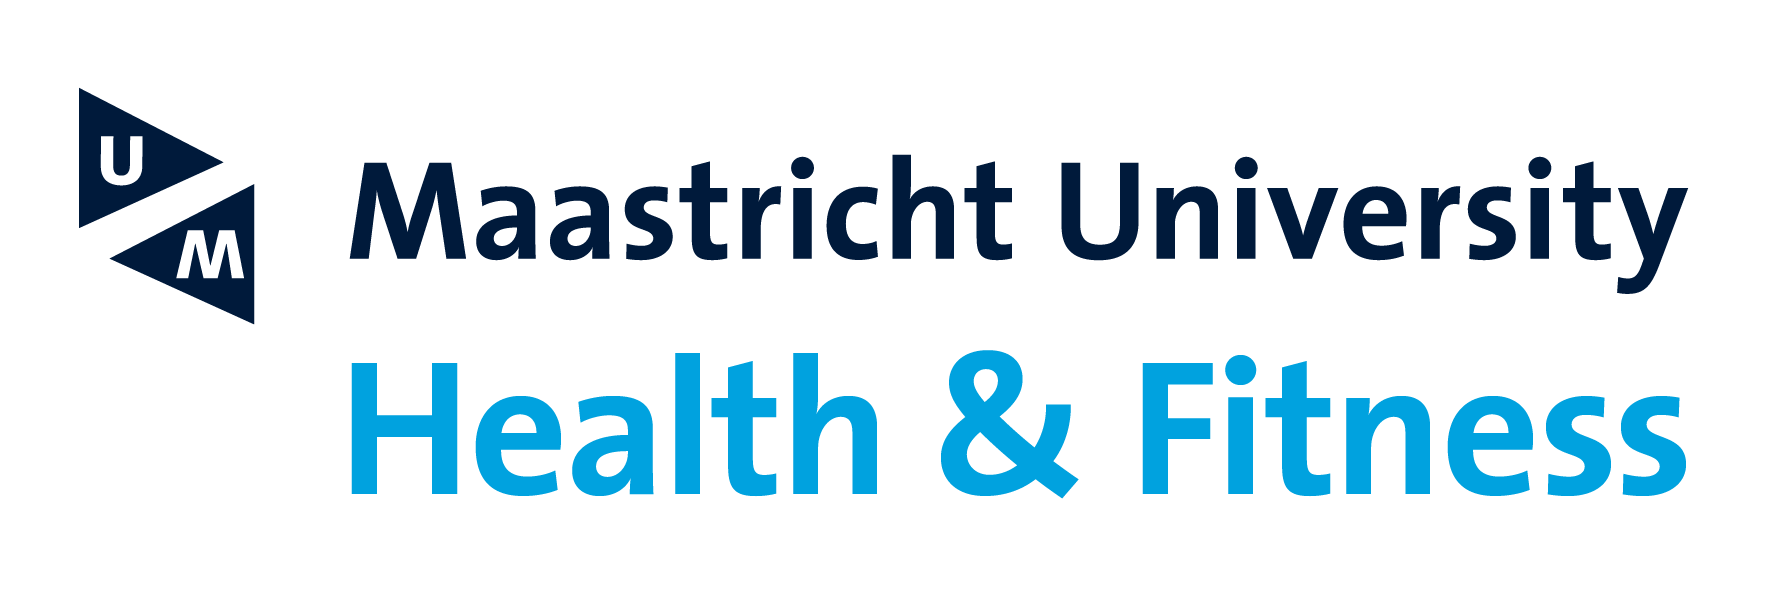 ease travel clinic & health support maastricht